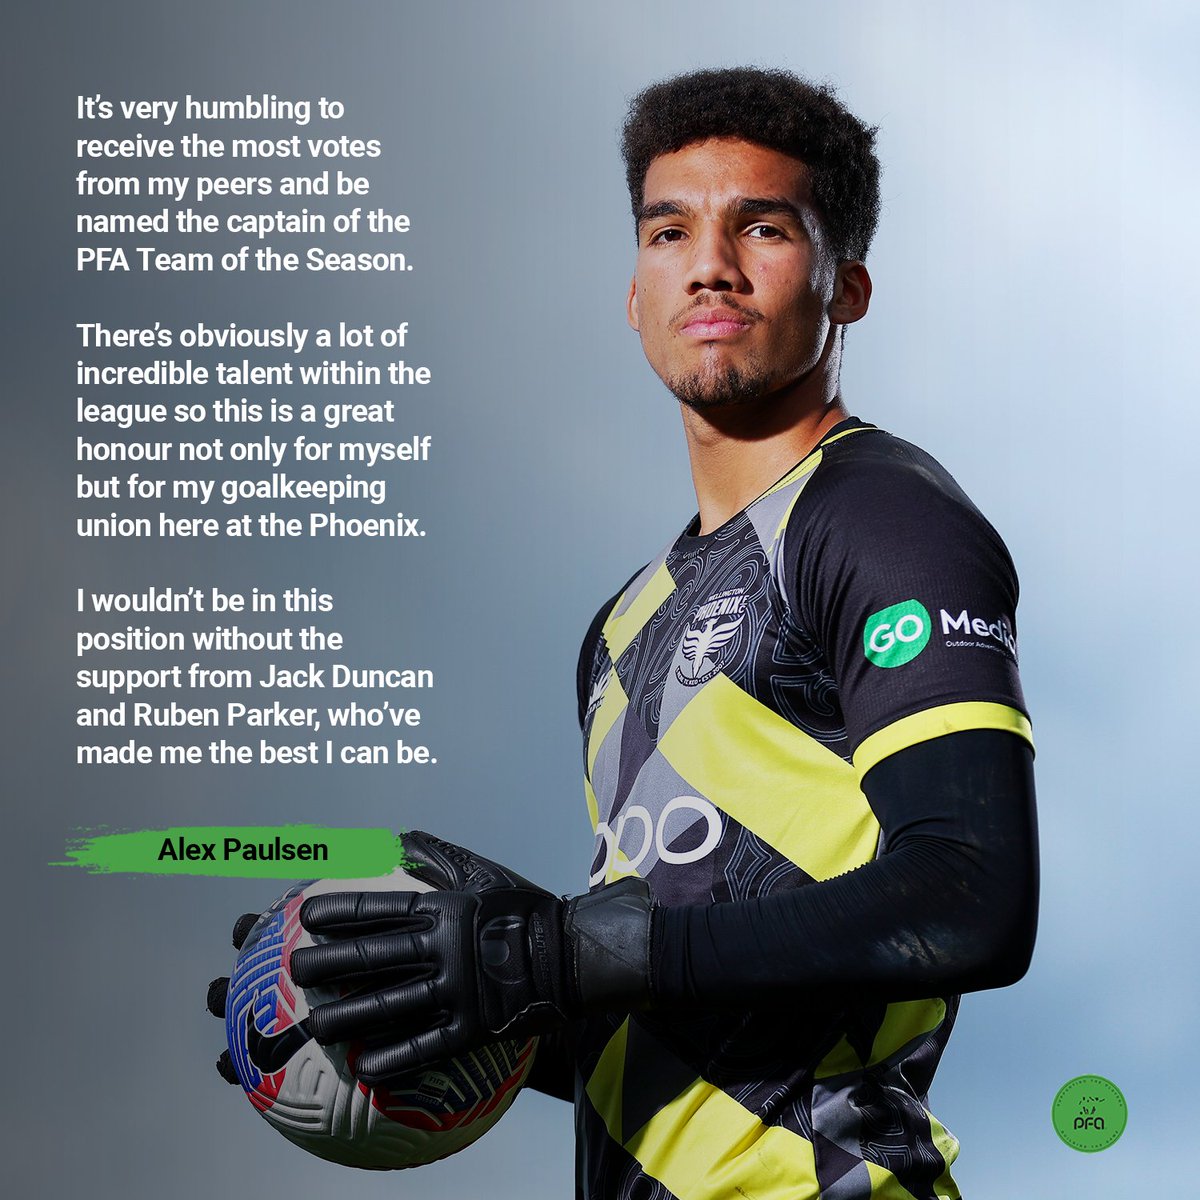 Introducing the Captain of the 2023-24 PFA A-League Men’s Team of the Season 🫡 @WgtnPhoenixFC's Alex Paulsen reflects on receiving the most votes from his peers after an incredible breakout season. 📰 pfa.net.au/news/pfa-revea… #SupportingThePlayers